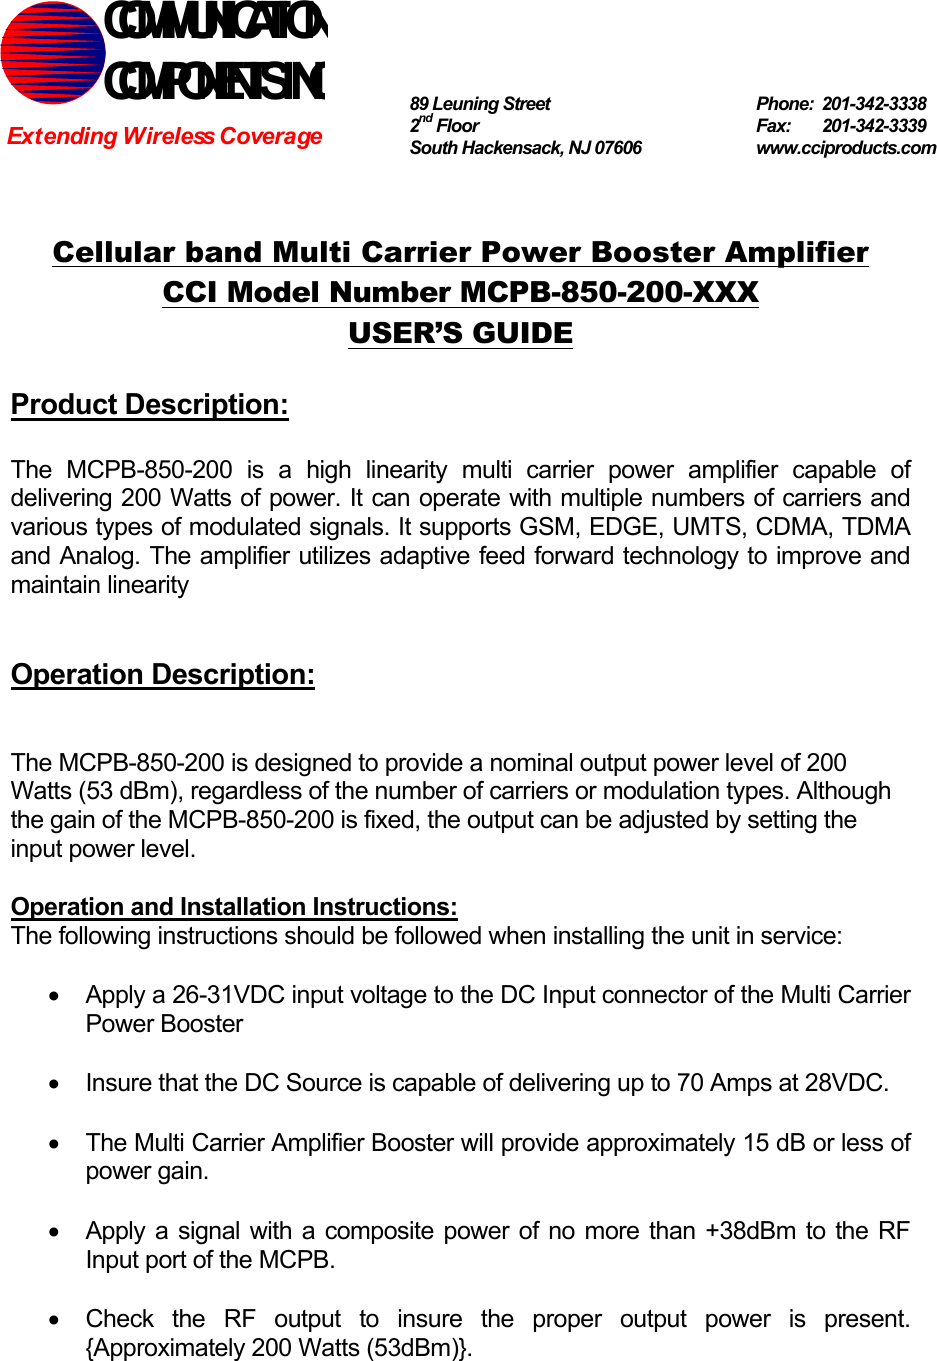   Cellular band Multi Carrier Power Booster Amplifier CCI Model Number MCPB-850-200-XXX USER’S GUIDE  Product Description:  The MCPB-850-200 is a high linearity multi carrier power amplifier capable of delivering 200 Watts of power. It can operate with multiple numbers of carriers and various types of modulated signals. It supports GSM, EDGE, UMTS, CDMA, TDMA and Analog. The amplifier utilizes adaptive feed forward technology to improve and maintain linearity   Operation Description:   The MCPB-850-200 is designed to provide a nominal output power level of 200 Watts (53 dBm), regardless of the number of carriers or modulation types. Although the gain of the MCPB-850-200 is fixed, the output can be adjusted by setting the input power level.  Operation and Installation Instructions: The following instructions should be followed when installing the unit in service:  •  Apply a 26-31VDC input voltage to the DC Input connector of the Multi Carrier Power Booster  •  Insure that the DC Source is capable of delivering up to 70 Amps at 28VDC.  •  The Multi Carrier Amplifier Booster will provide approximately 15 dB or less of power gain.  •  Apply a signal with a composite power of no more than +38dBm to the RF Input port of the MCPB.  •  Check the RF output to insure the proper output power is present. {Approximately 200 Watts (53dBm)}.  COMMUNICATION COMPONENTS INC Extending Wireless Coverage 89 Leuning Street   Phone: 201-342-3338 2nd Floor  Fax:   201-342-3339 South Hackensack, NJ 07606   www.cciproducts.com 